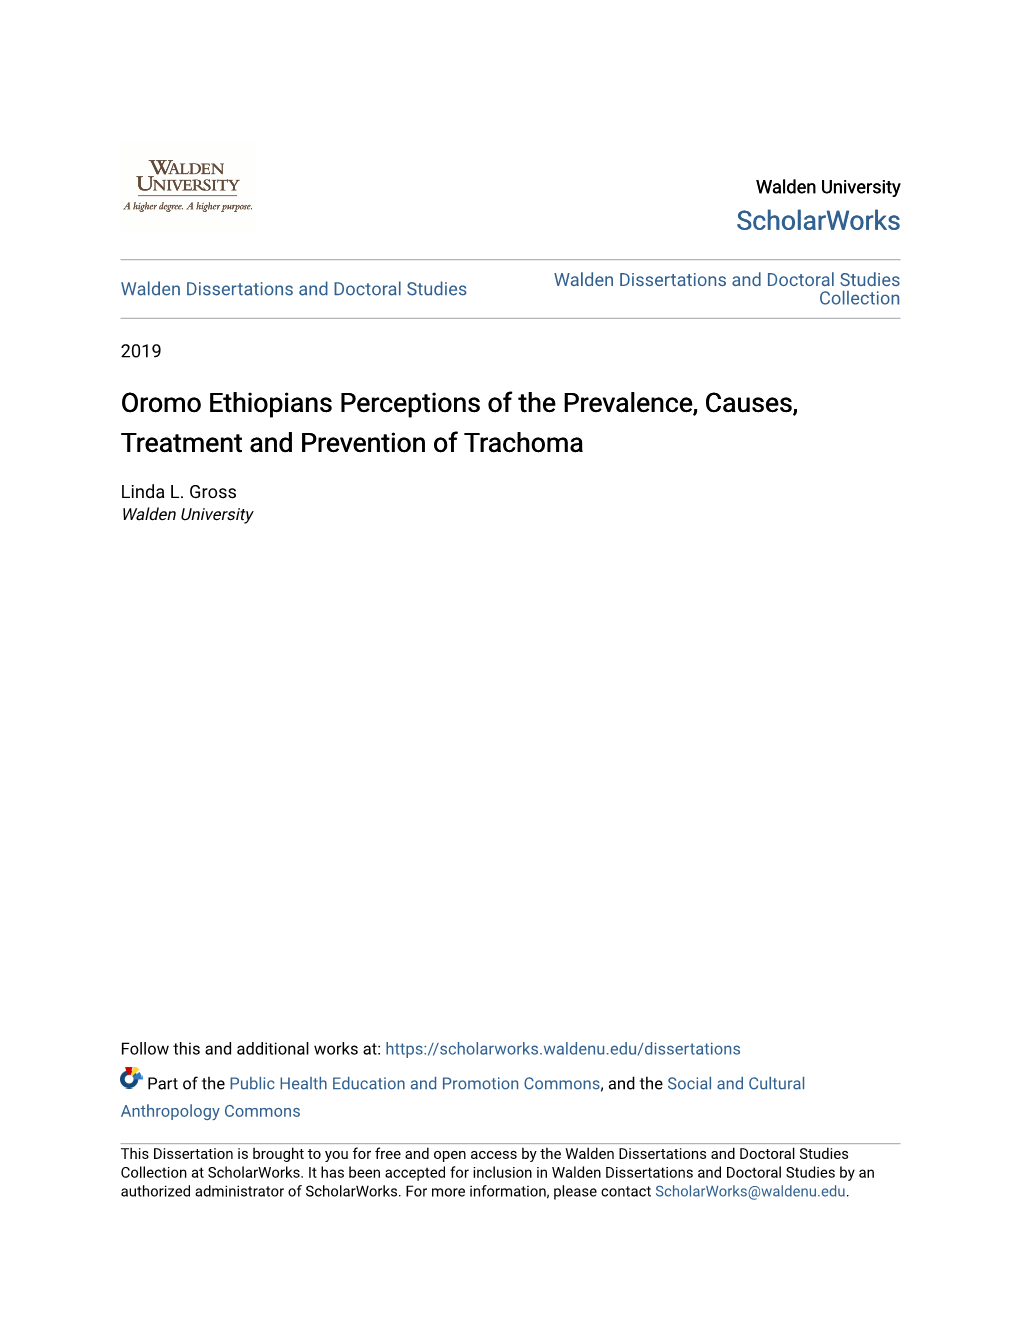 Oromo Ethiopians Perceptions of the Prevalence, Causes, Treatment and Prevention of Trachoma